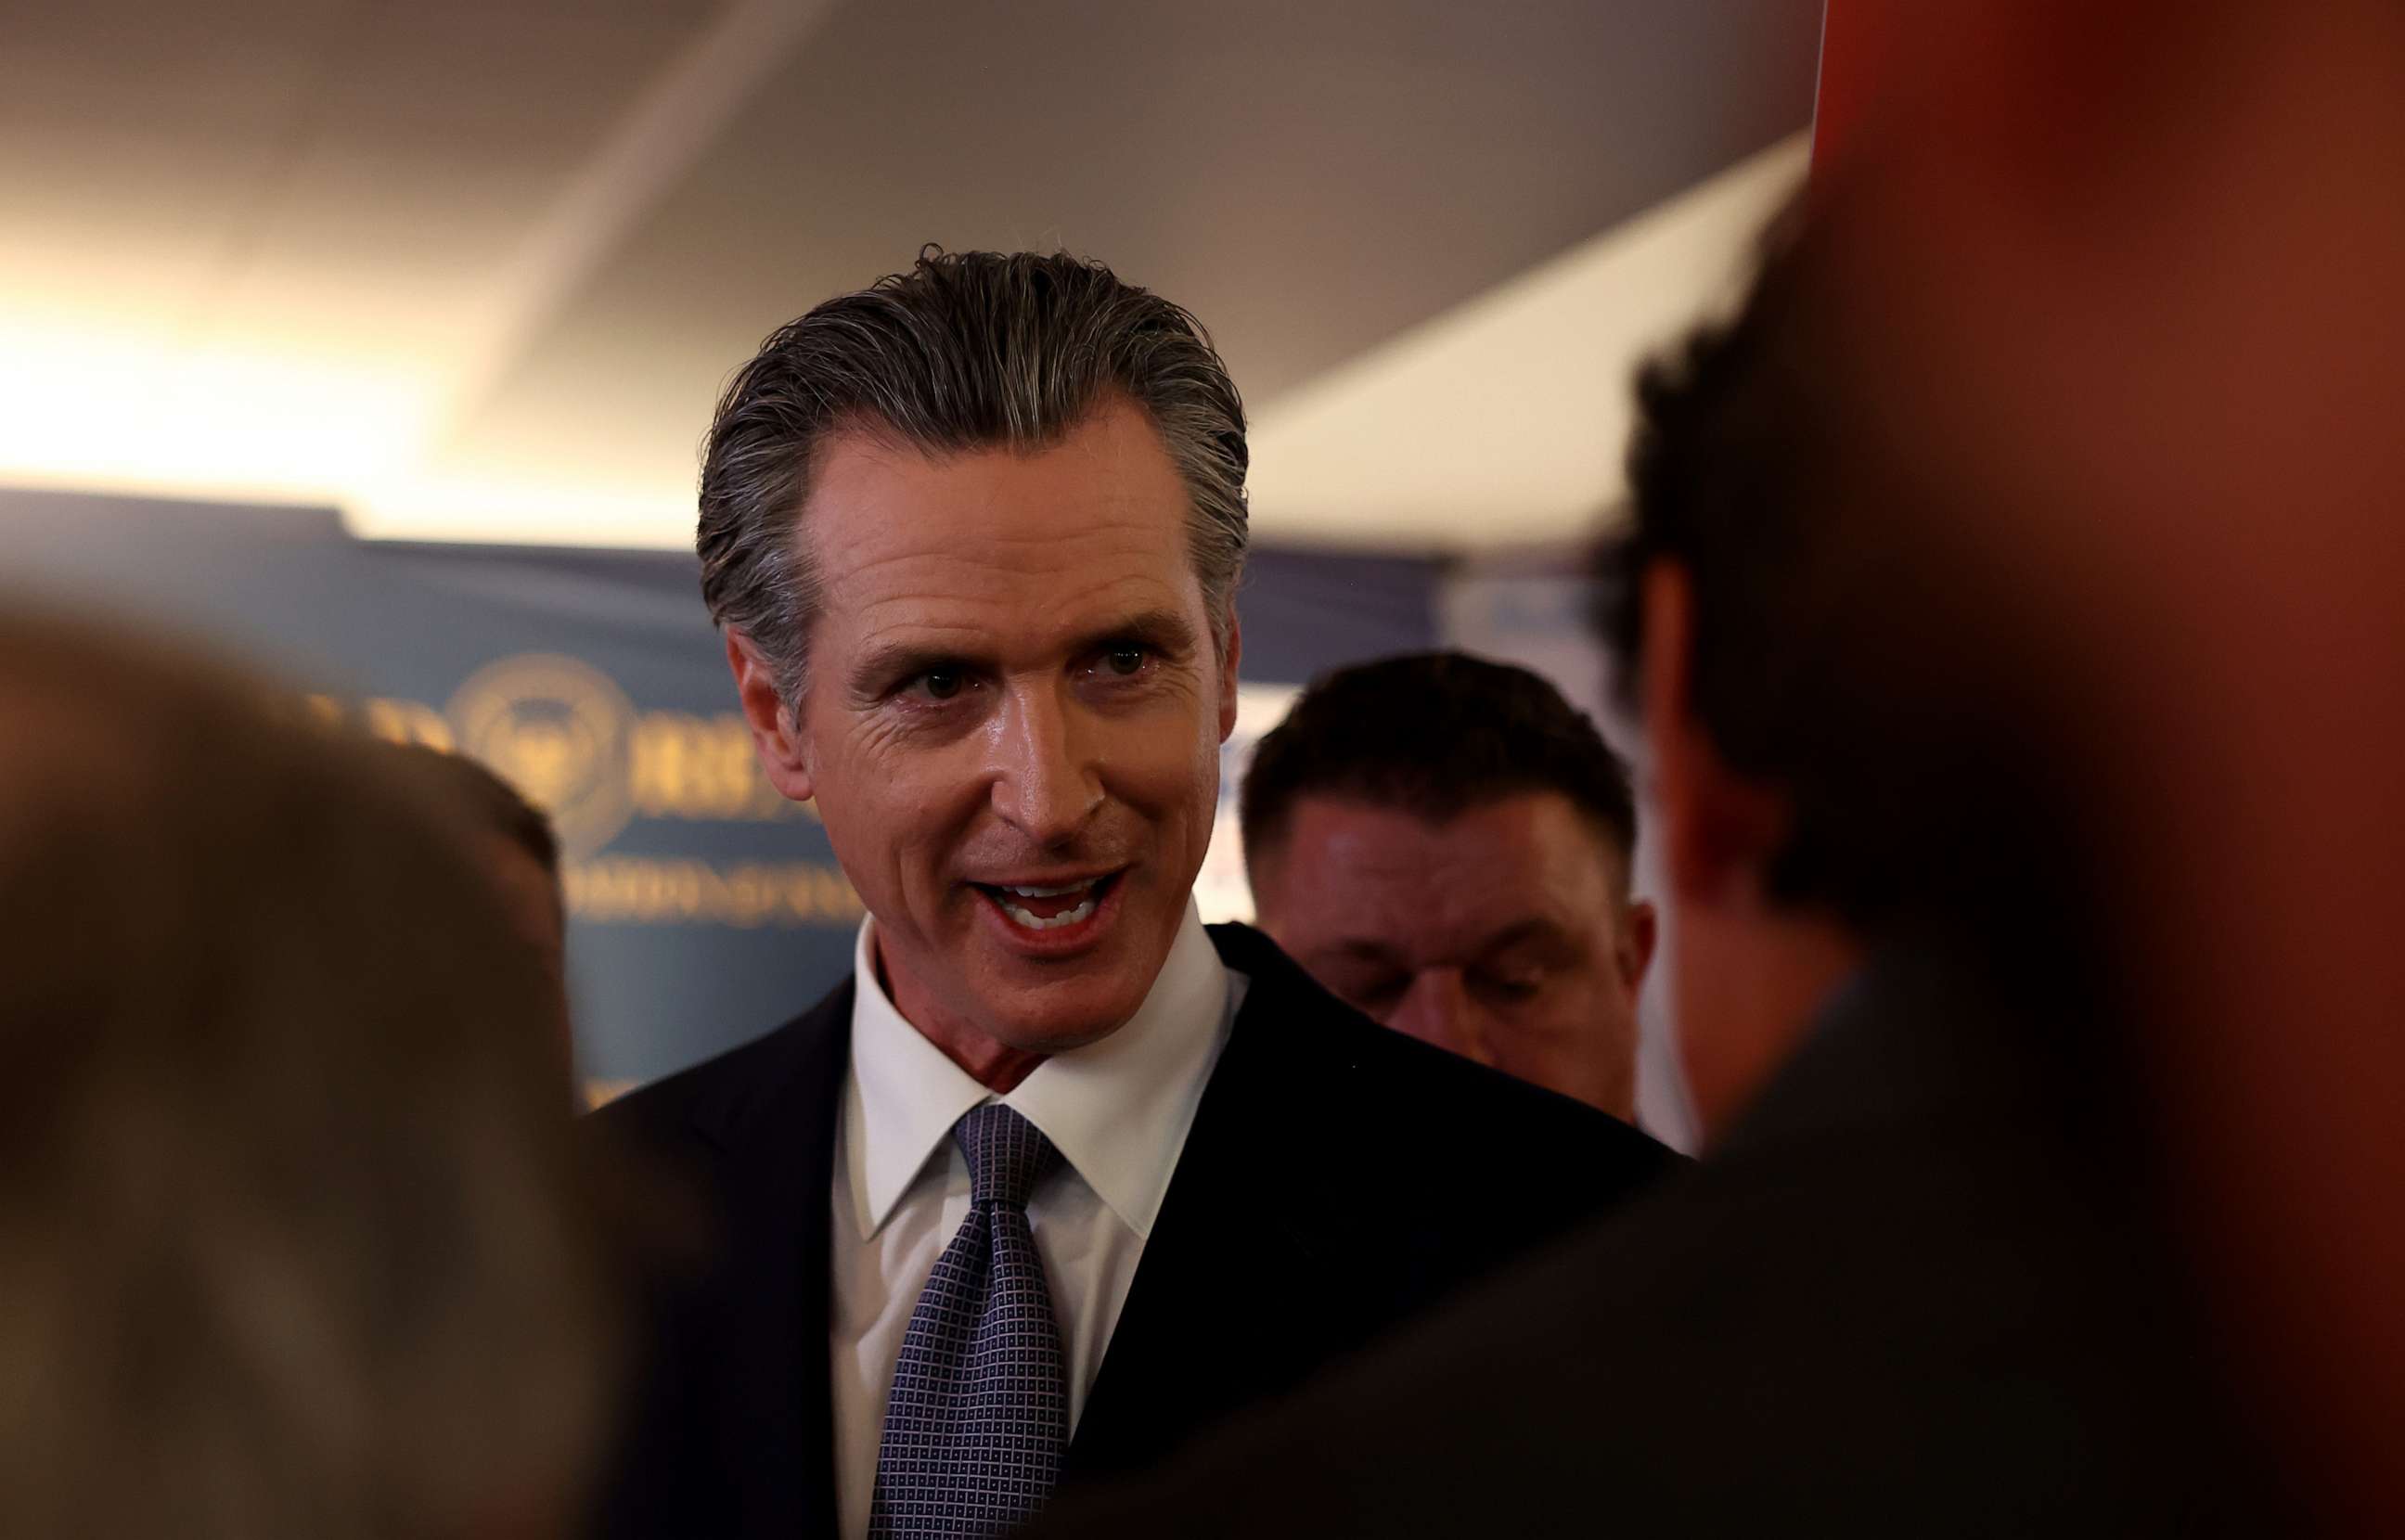 California Gov. Gavin Newsom talks to reporters in the spin room following the FOX Business Republican Primary Debate at the Ronald Reagan Presidential Library on September 27, 2023